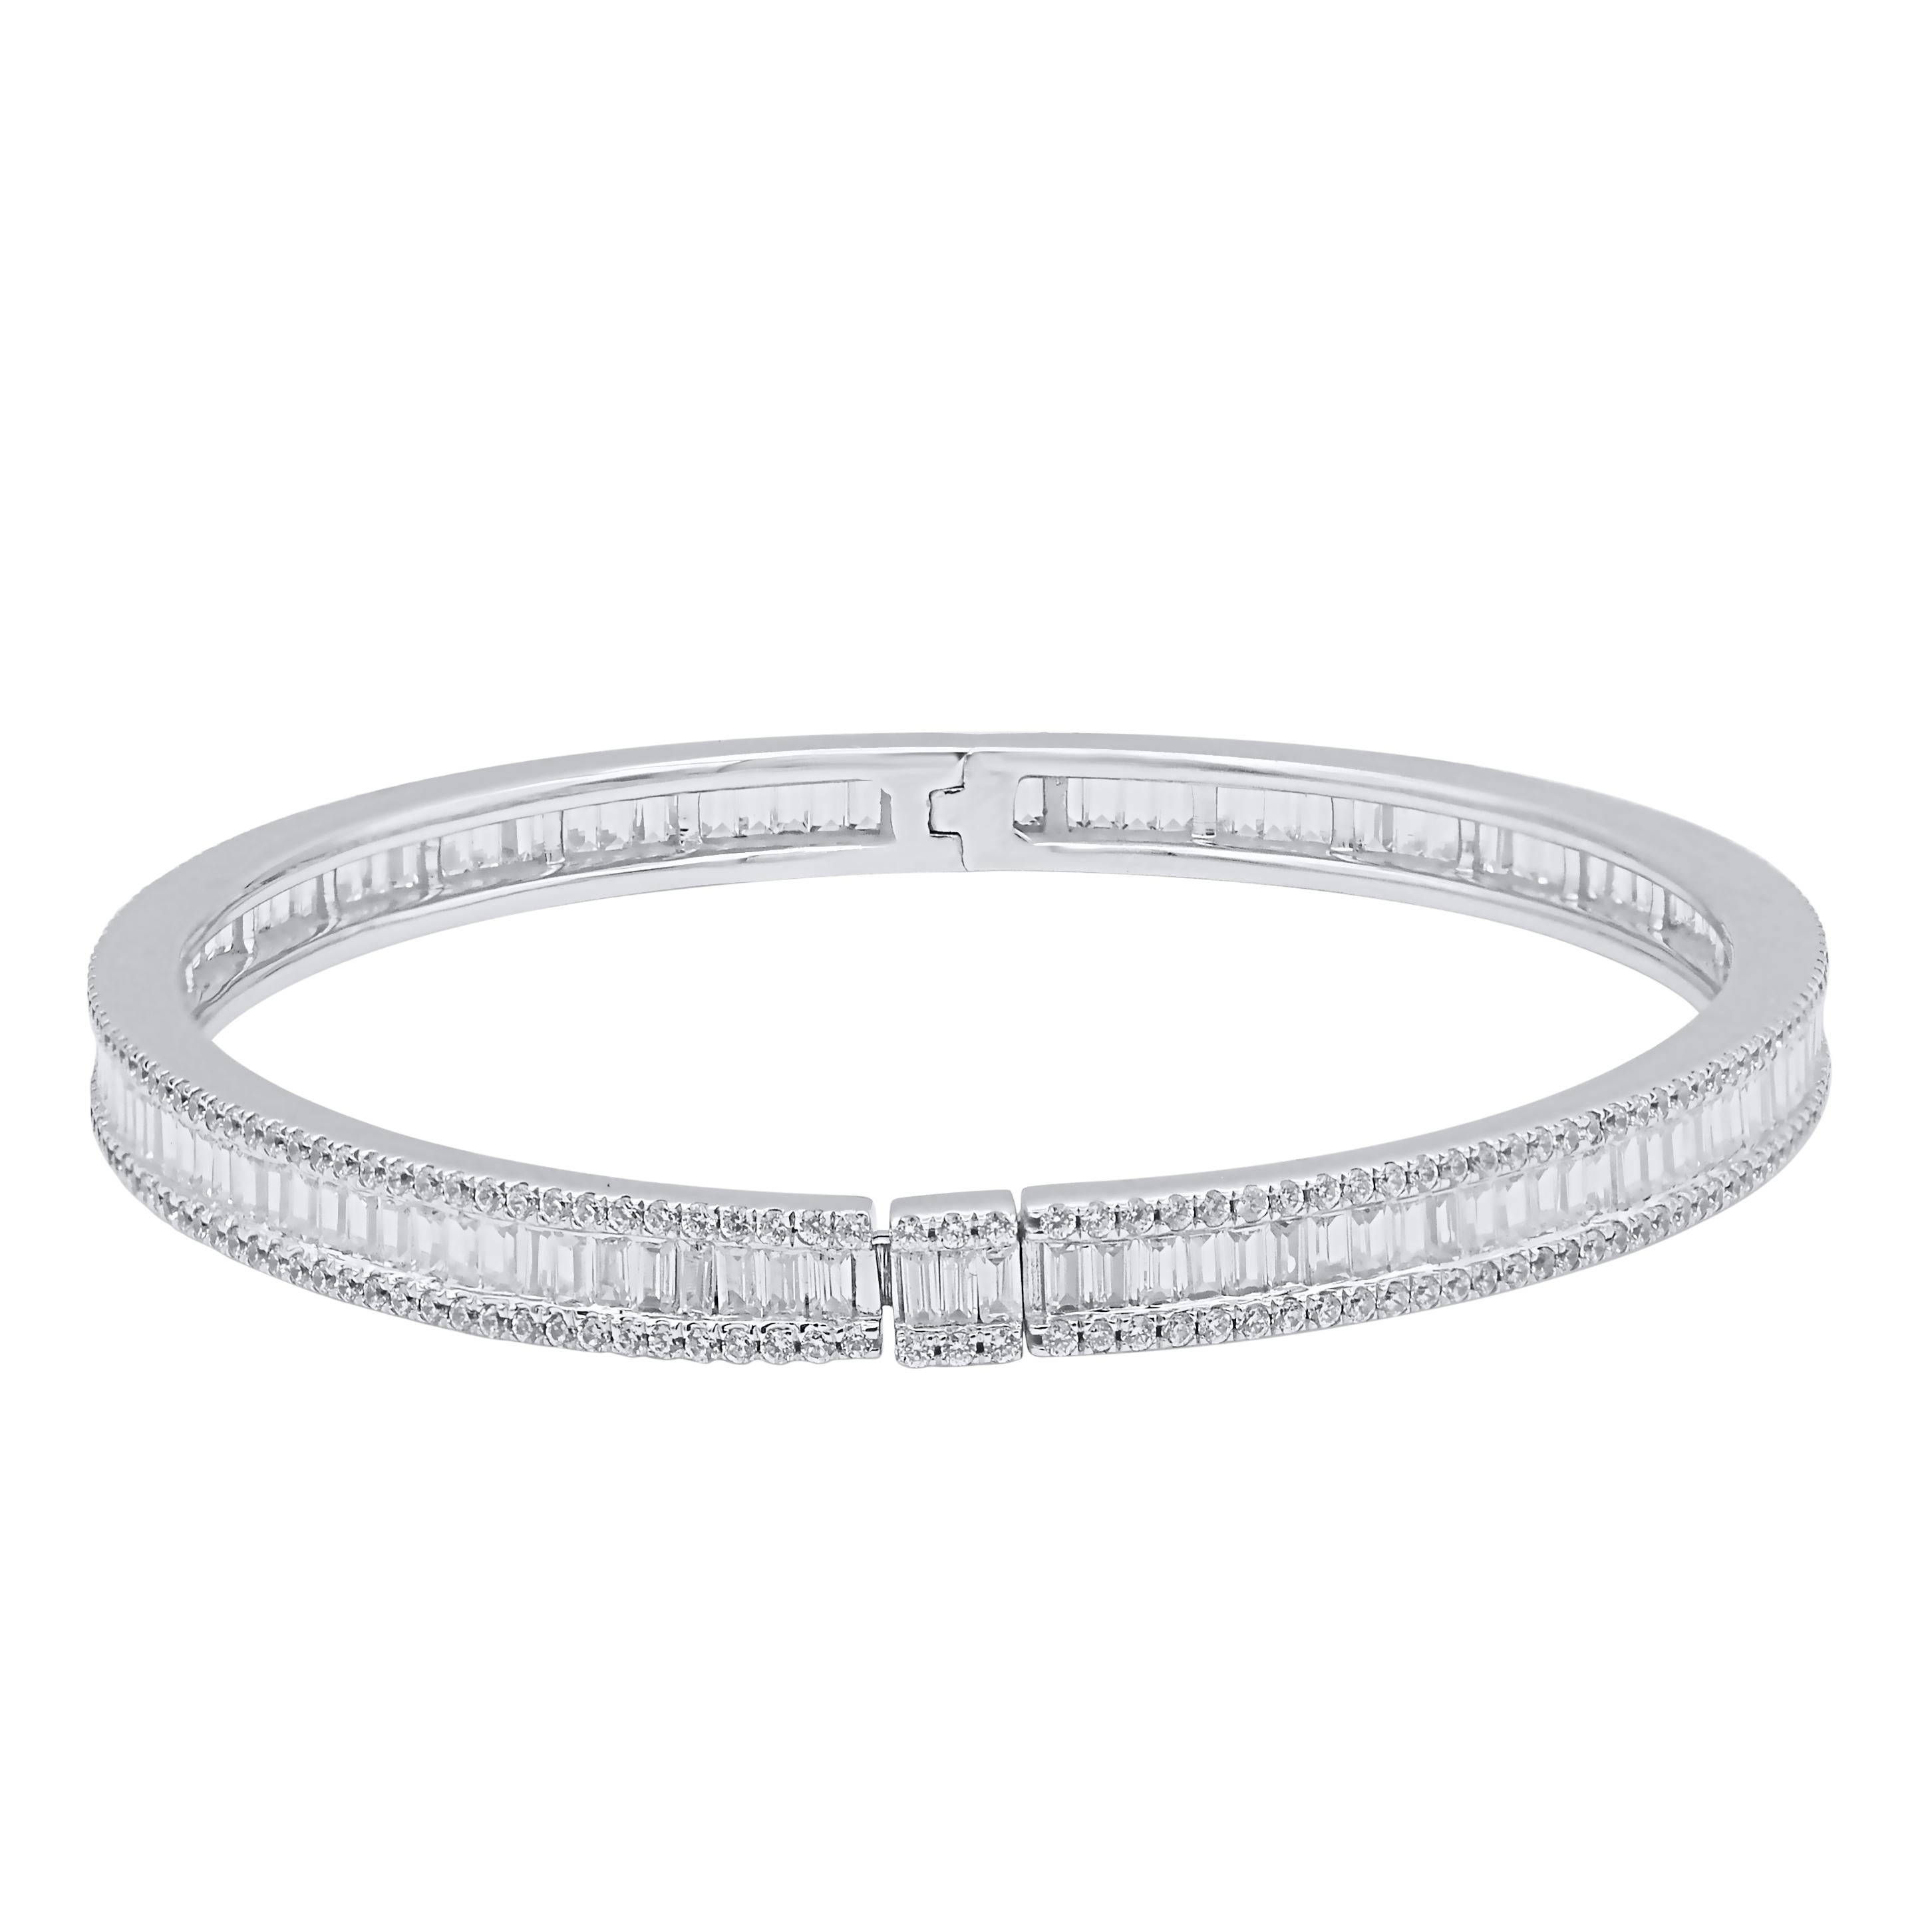 Classic and sophisticated, this diamond bangle bracelet pairs well with any attire.
This Shimmering bangle bracelet features 480 natural round single cut & baguette diamonds in prong and channel setting and crafted in 18kt white gold. Diamonds are